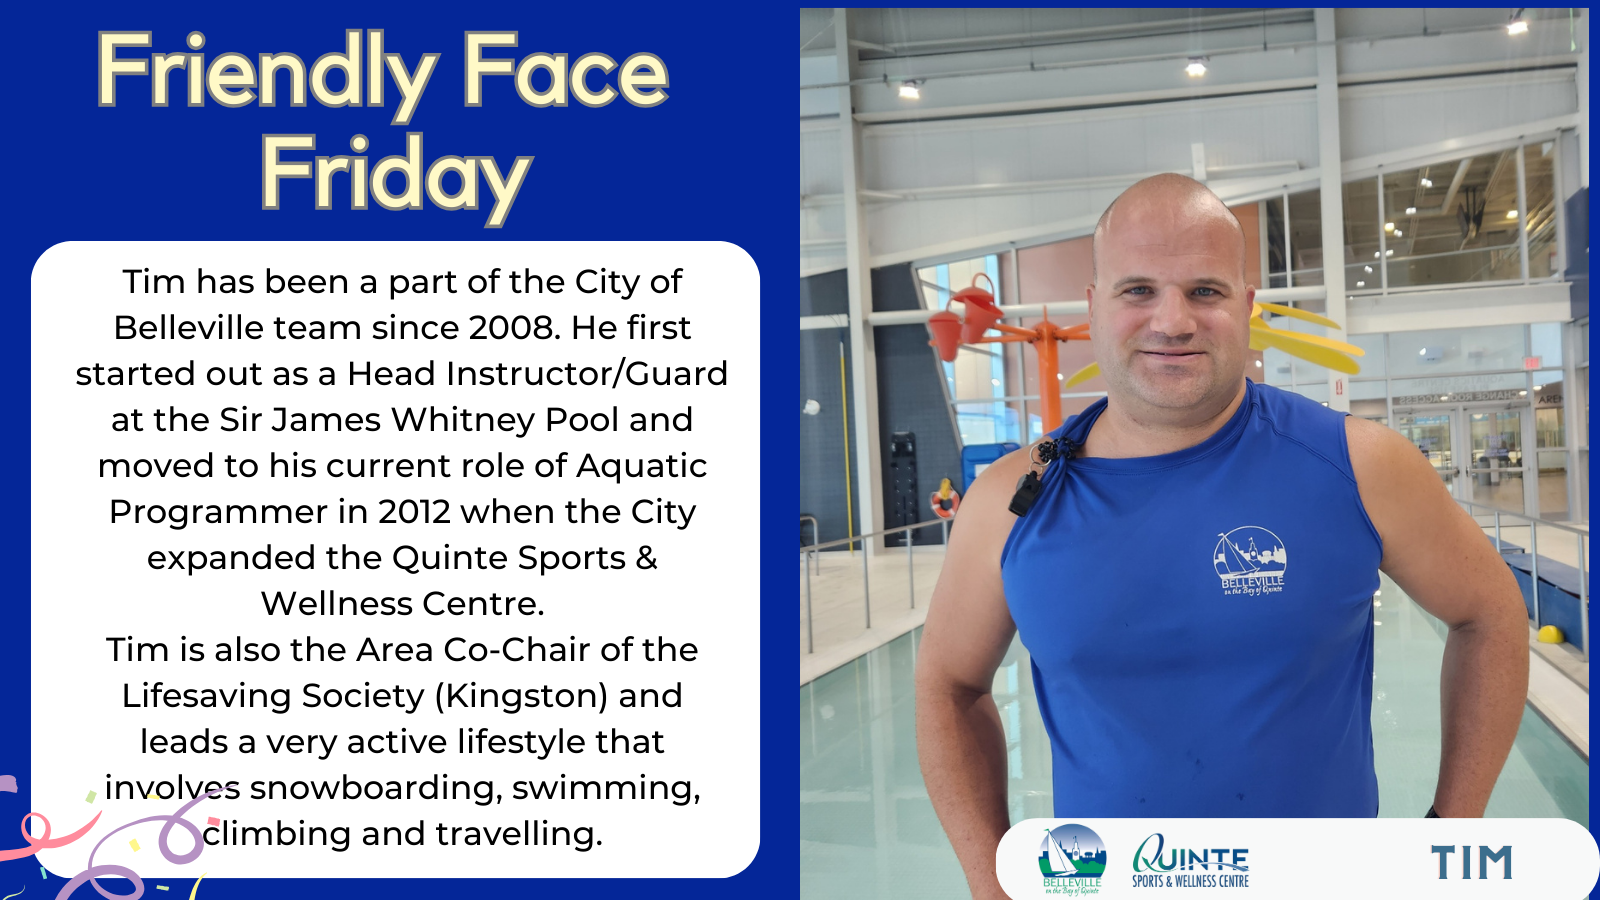 Friendly Face Friday with Tim Tim has been a part of the City of Belleville team since 2008. He first started out as a Head Instructor/Guard at the Sir James Whitney Pool and moved to his current role of Aquatic Programmer in 2012 when the City expanded the Quinte Sports & Wellness Centre. Tim is also the Area Co-Chair of the Lifesaving Society (Kingston) and leads a very active lifestyle that involves snowboarding, swimming, climbing and travelling.